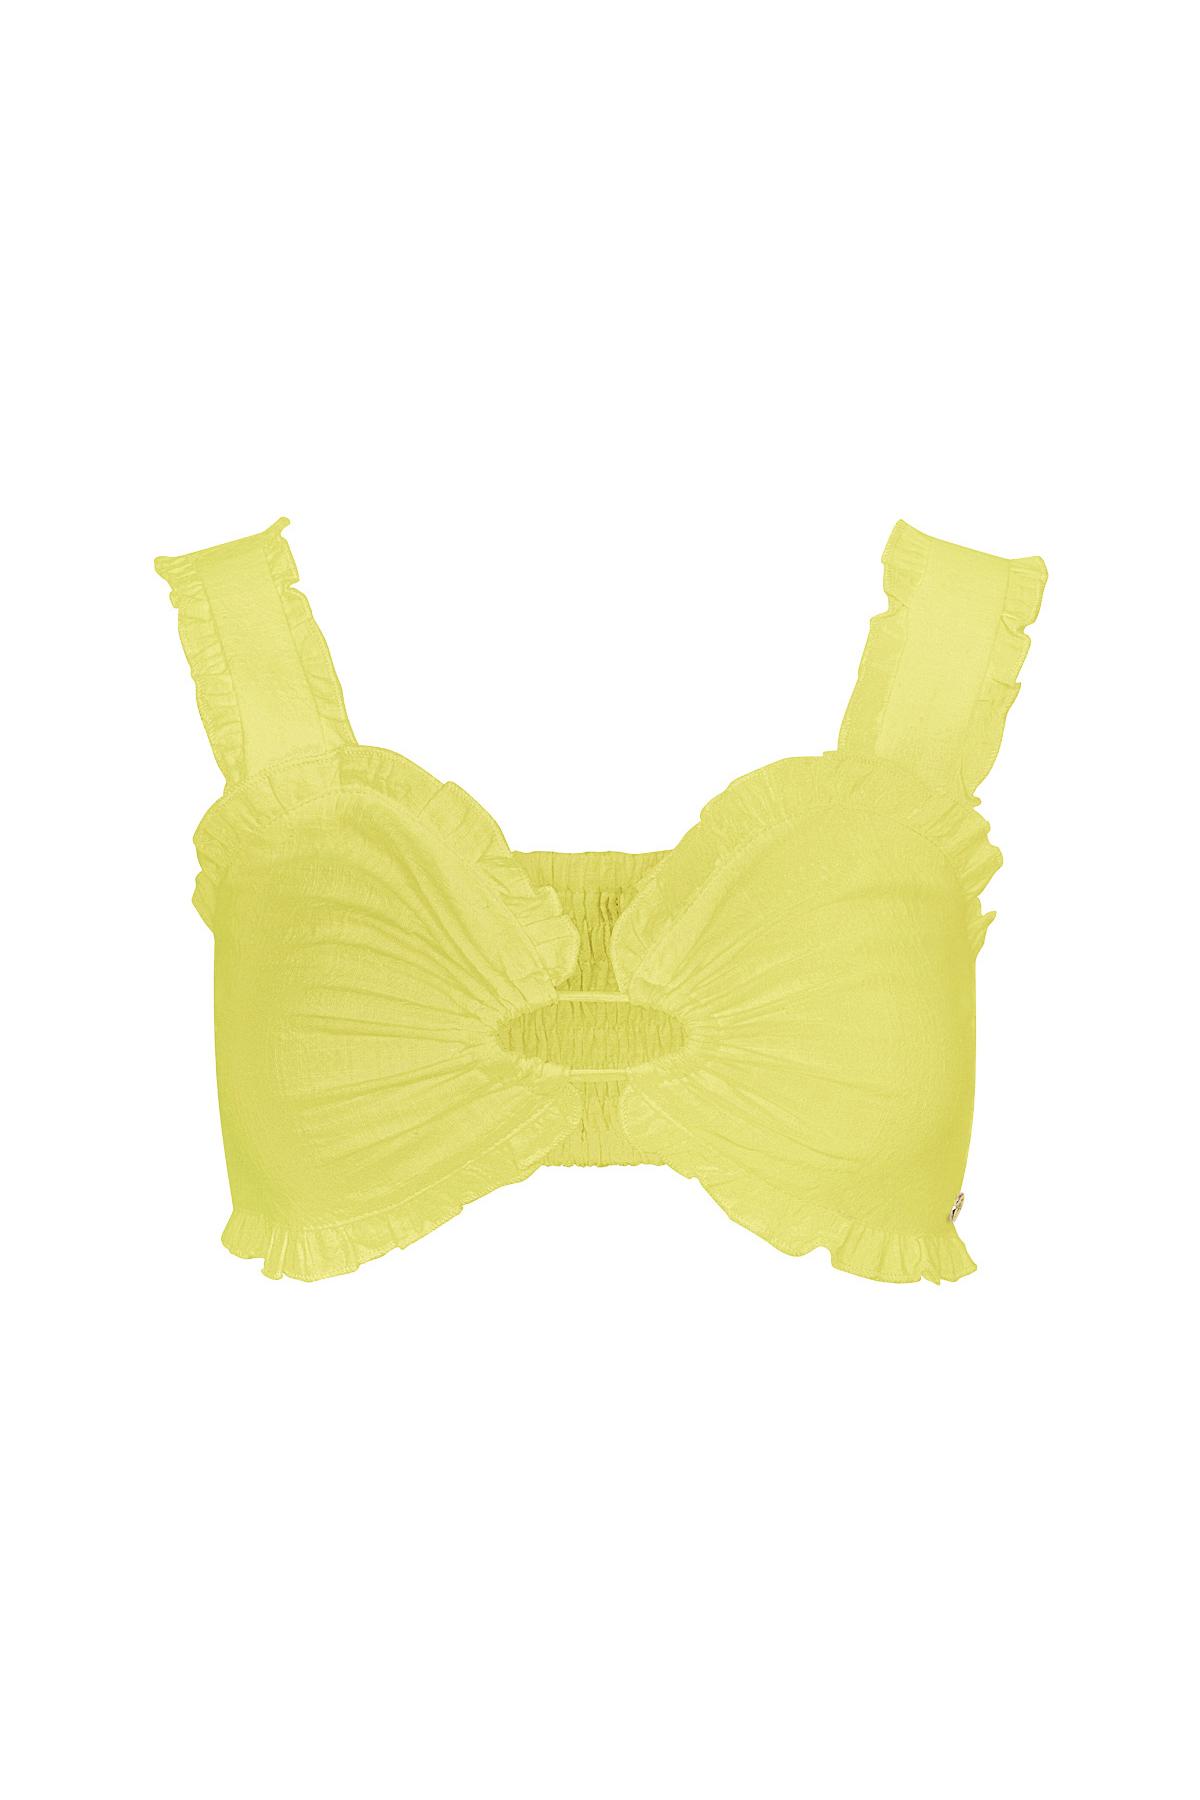 Crop top cut out - yellow M 